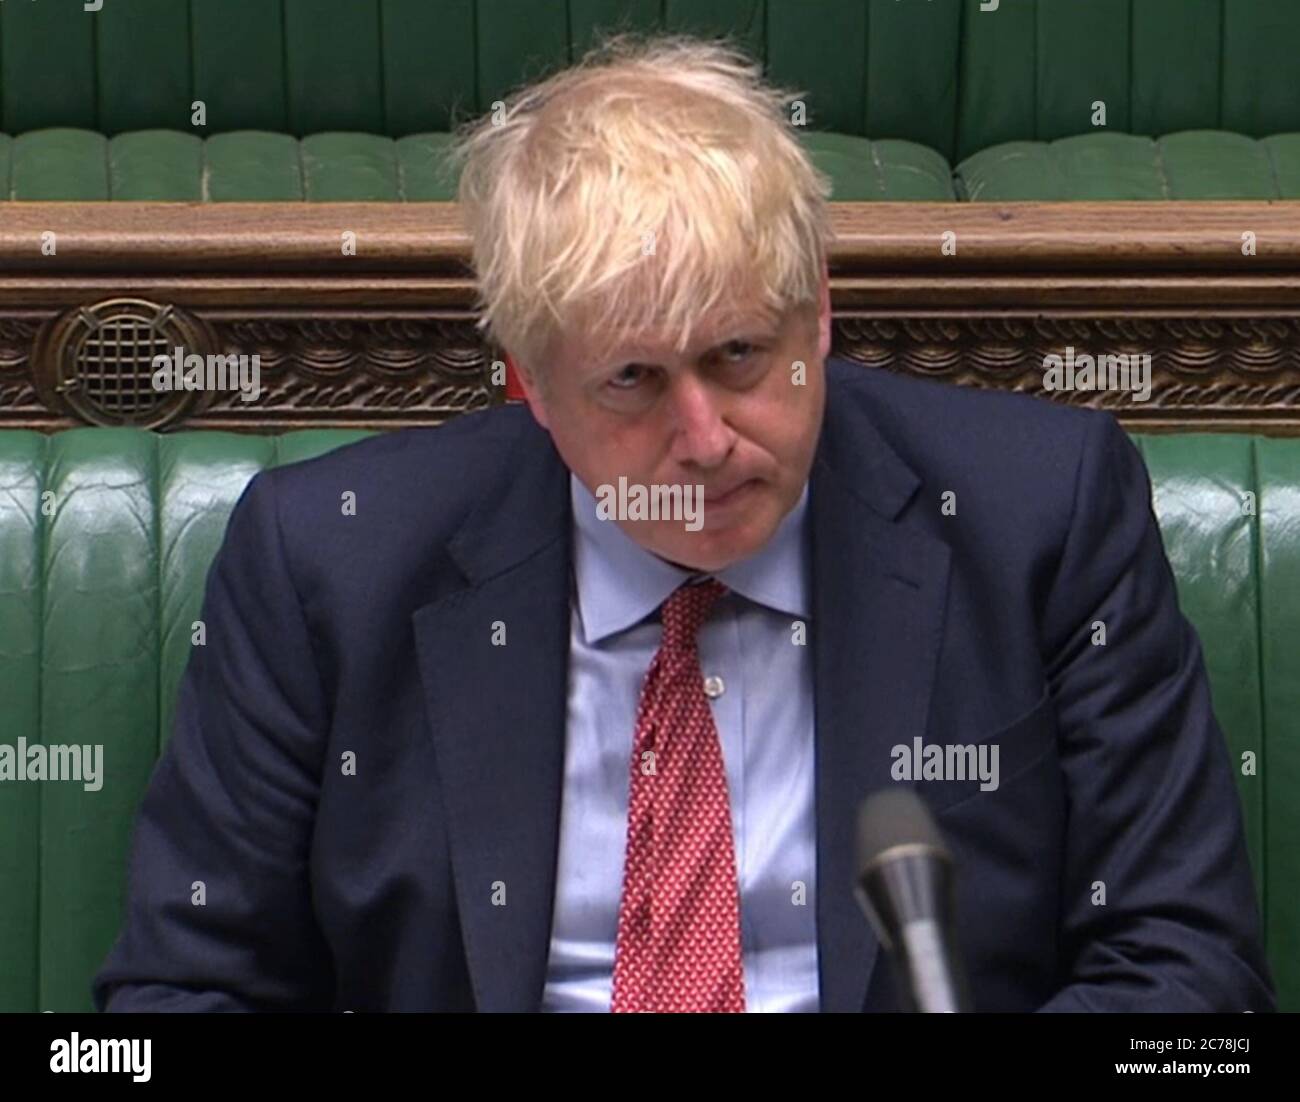 Prime Minister Boris Johnson during Prime Minister's Questions in the House of Commons, London. Stock Photo